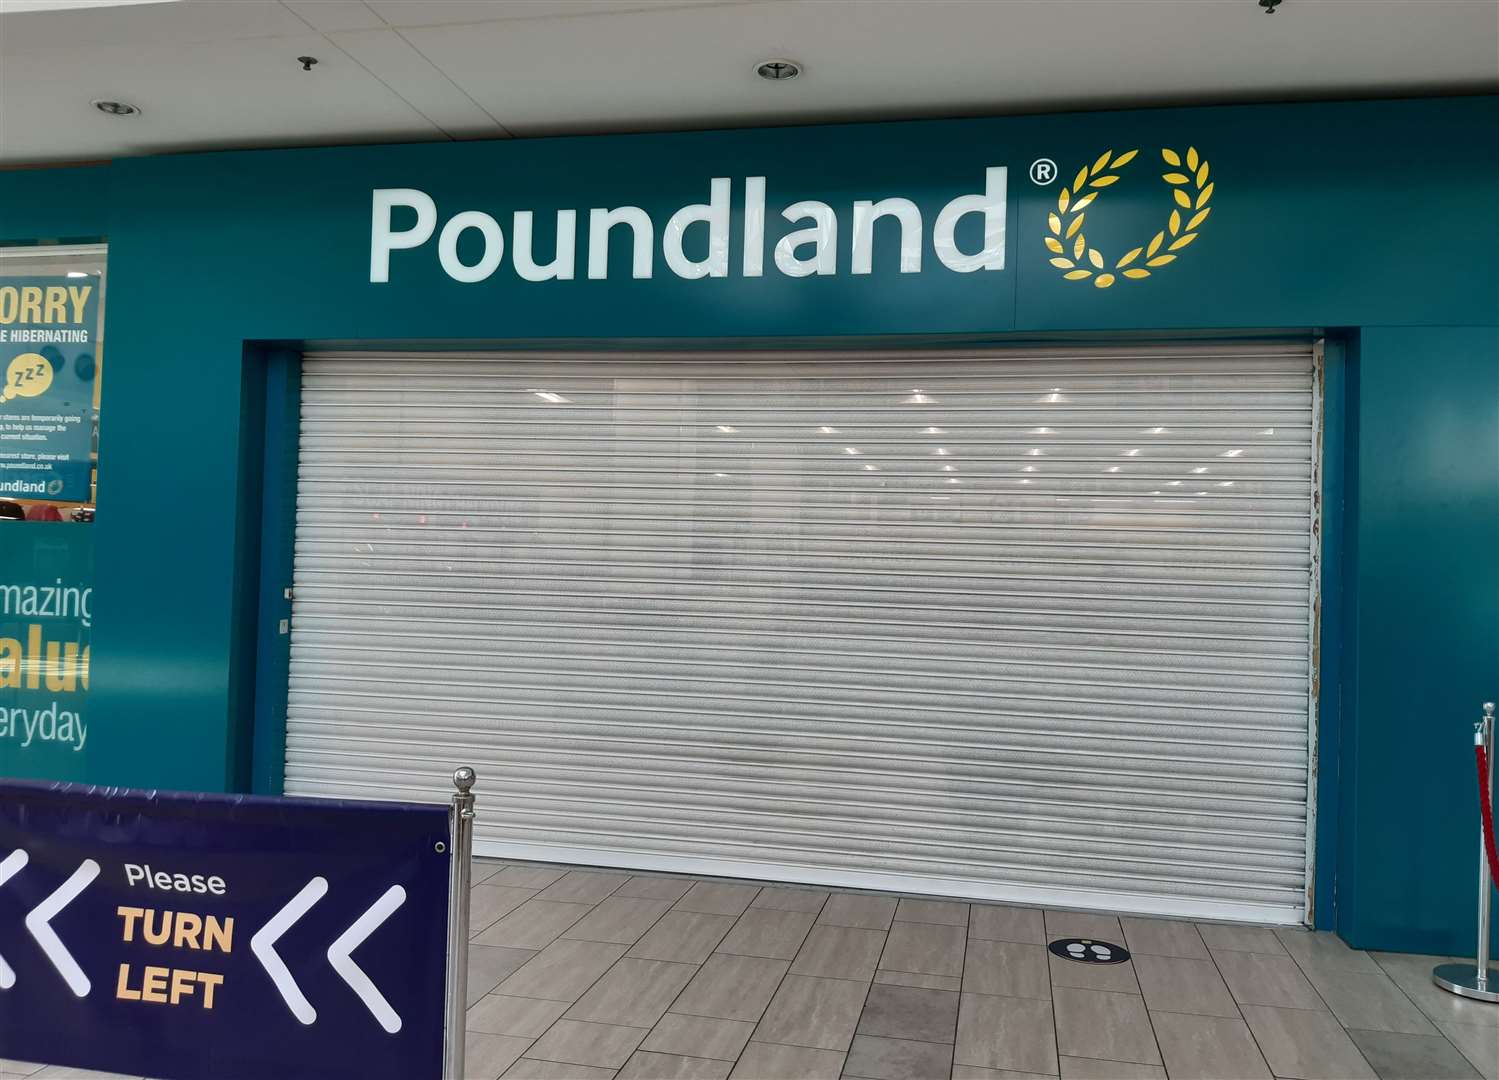 The shutters are down at the County Square Poundland